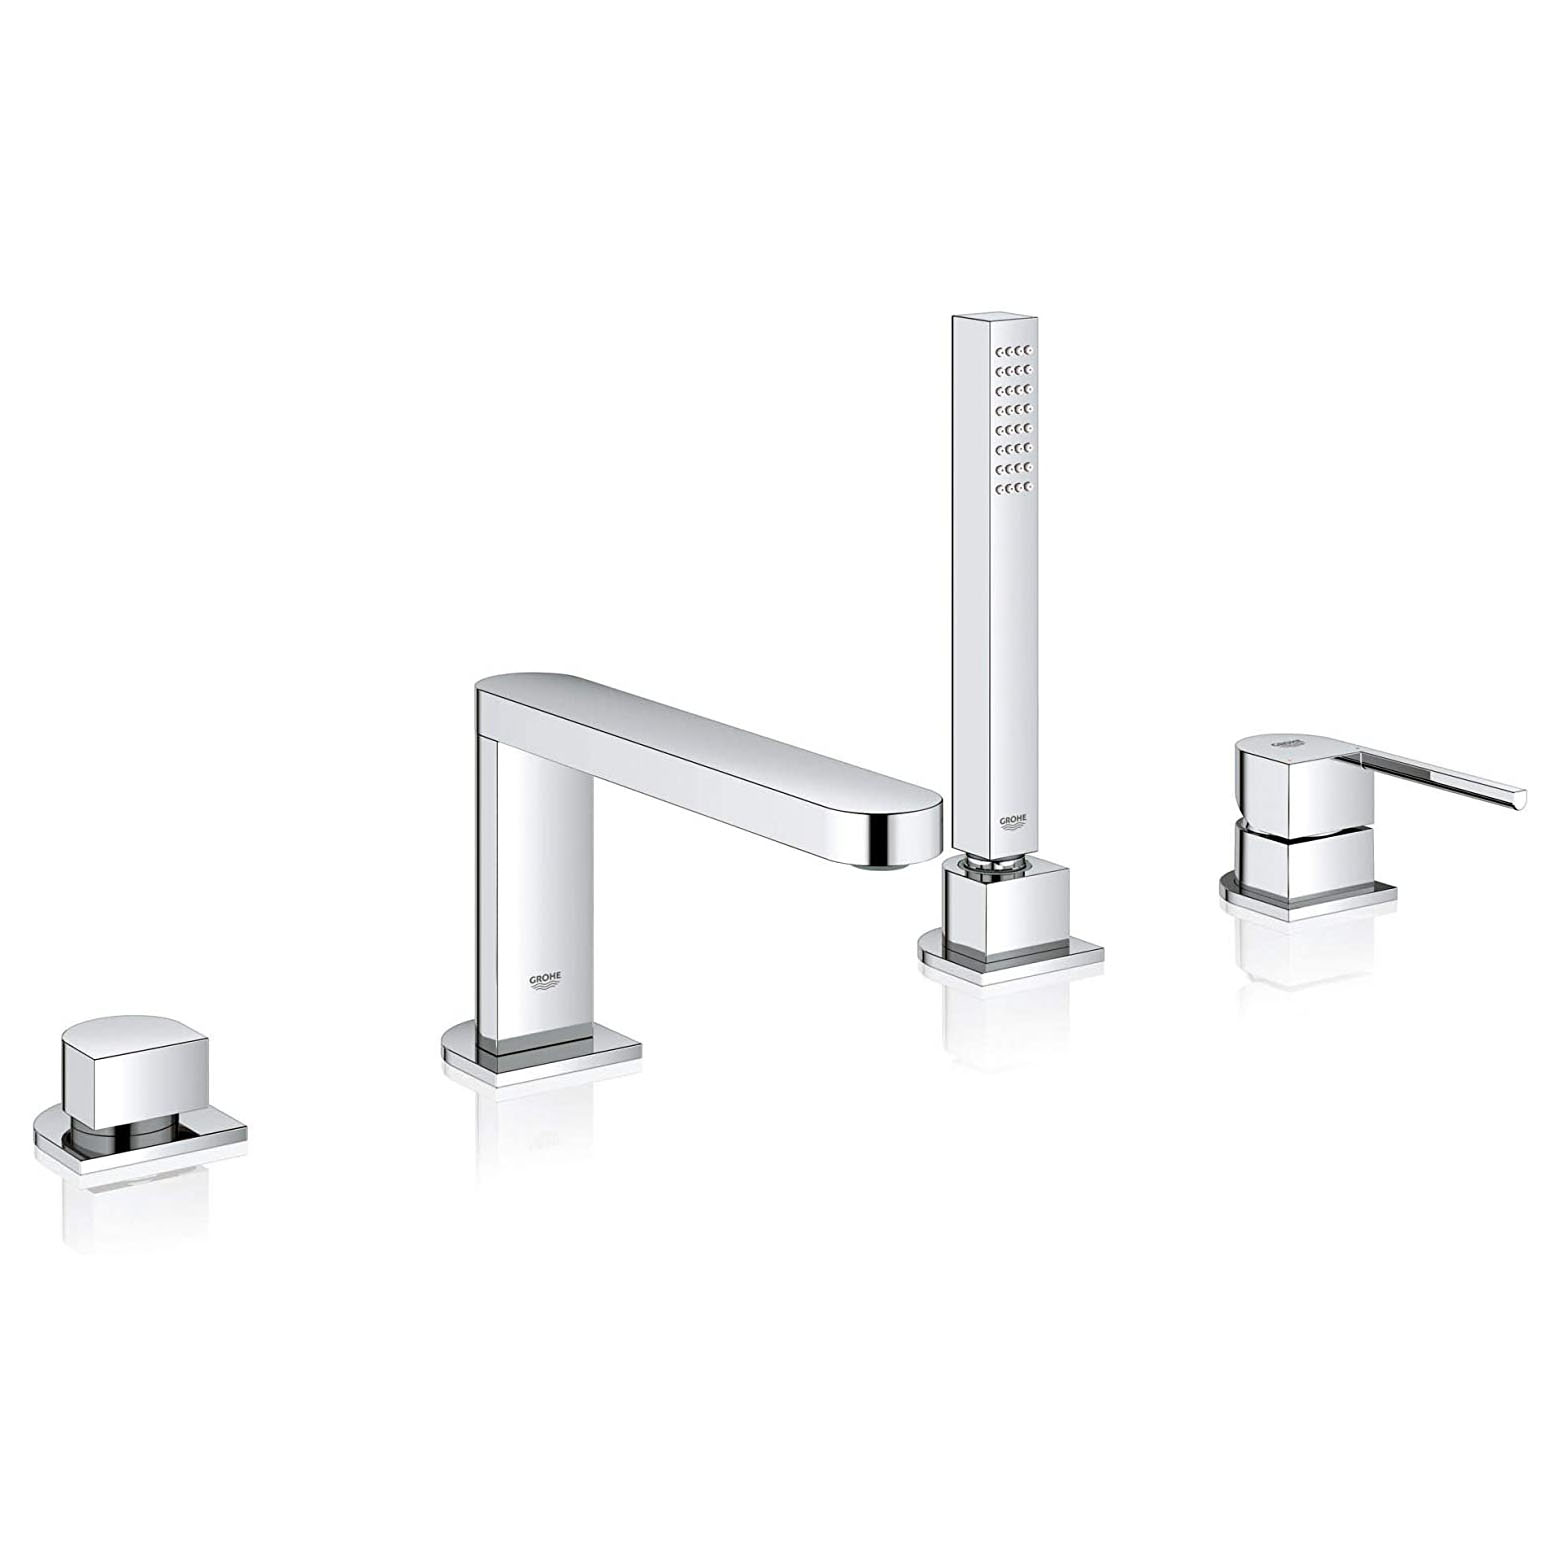 Plus Deck Mounted Tub Faucet Plus Hand Shower In StarLight Chrome